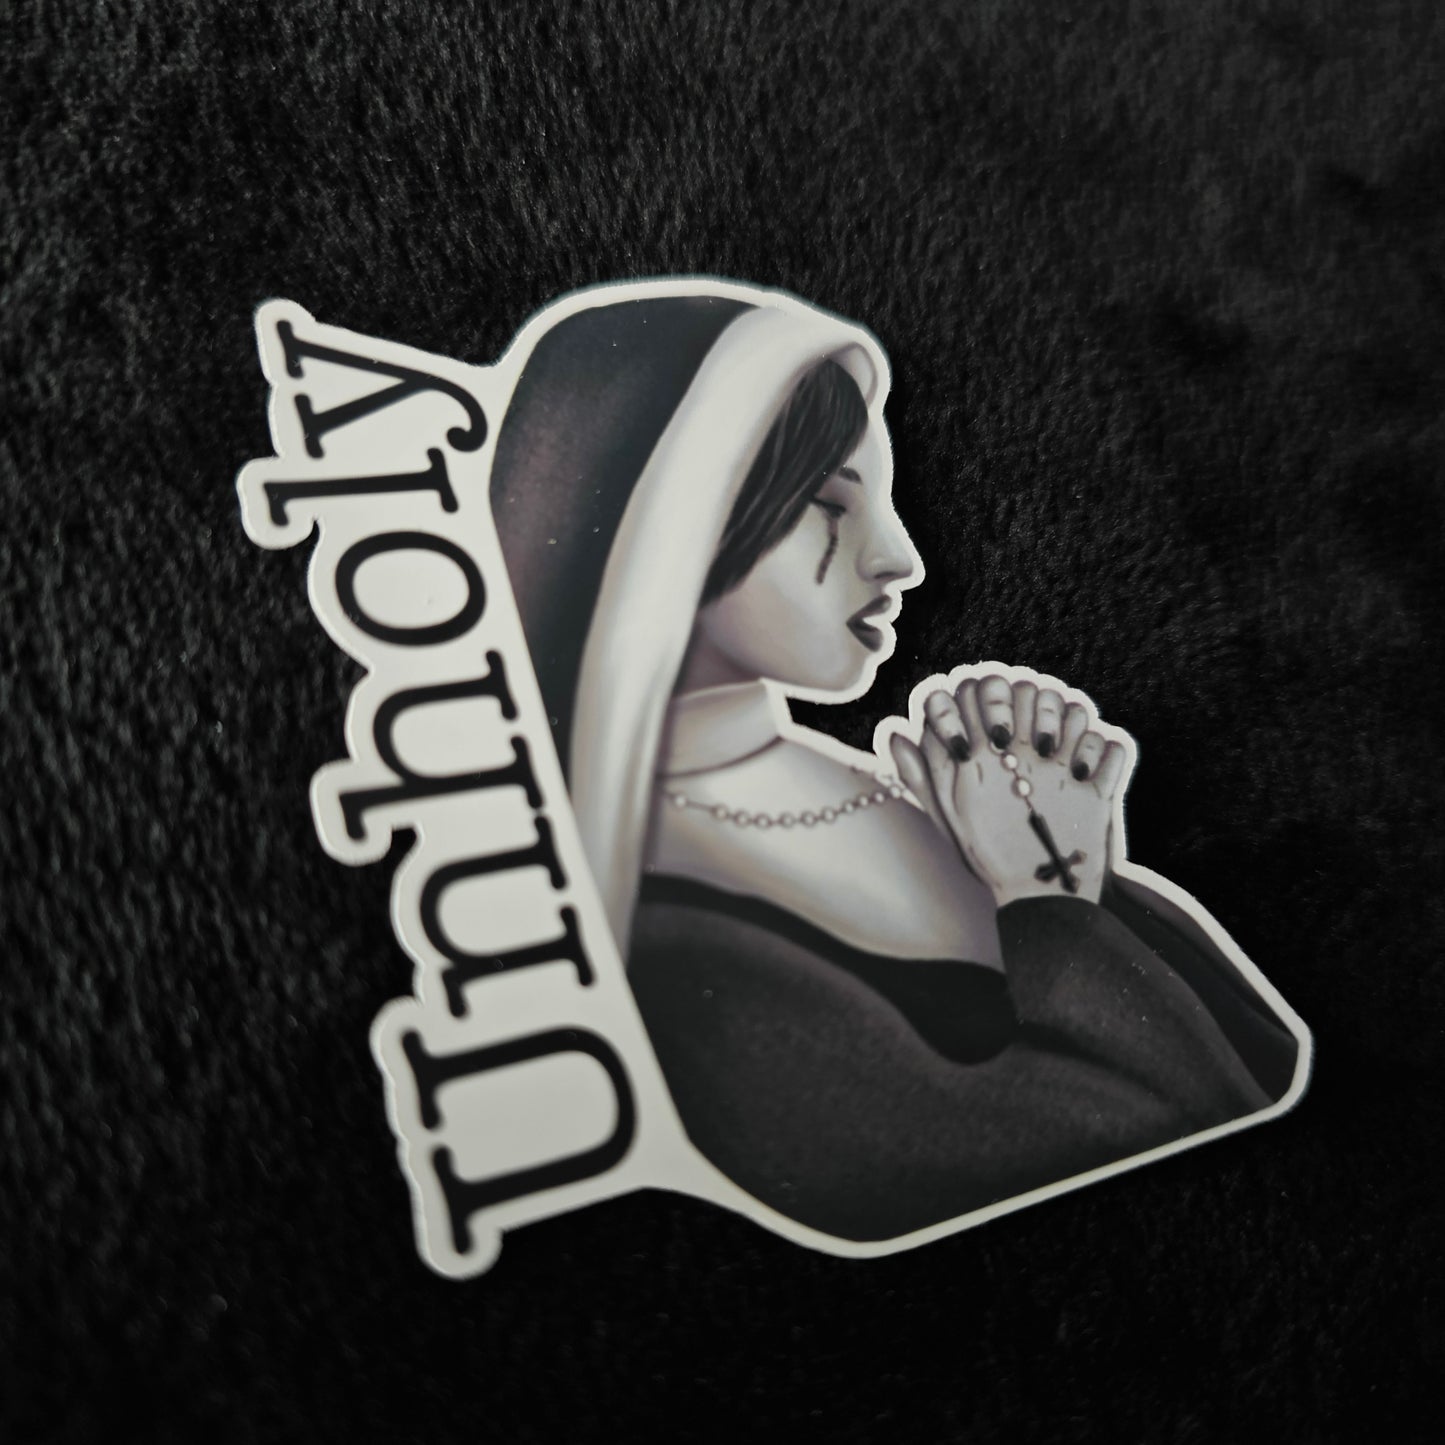 Unholy - Waterproof Vinyl Stickers - Durable Decals for Laptops, Skateboards, and Outdoor Gear